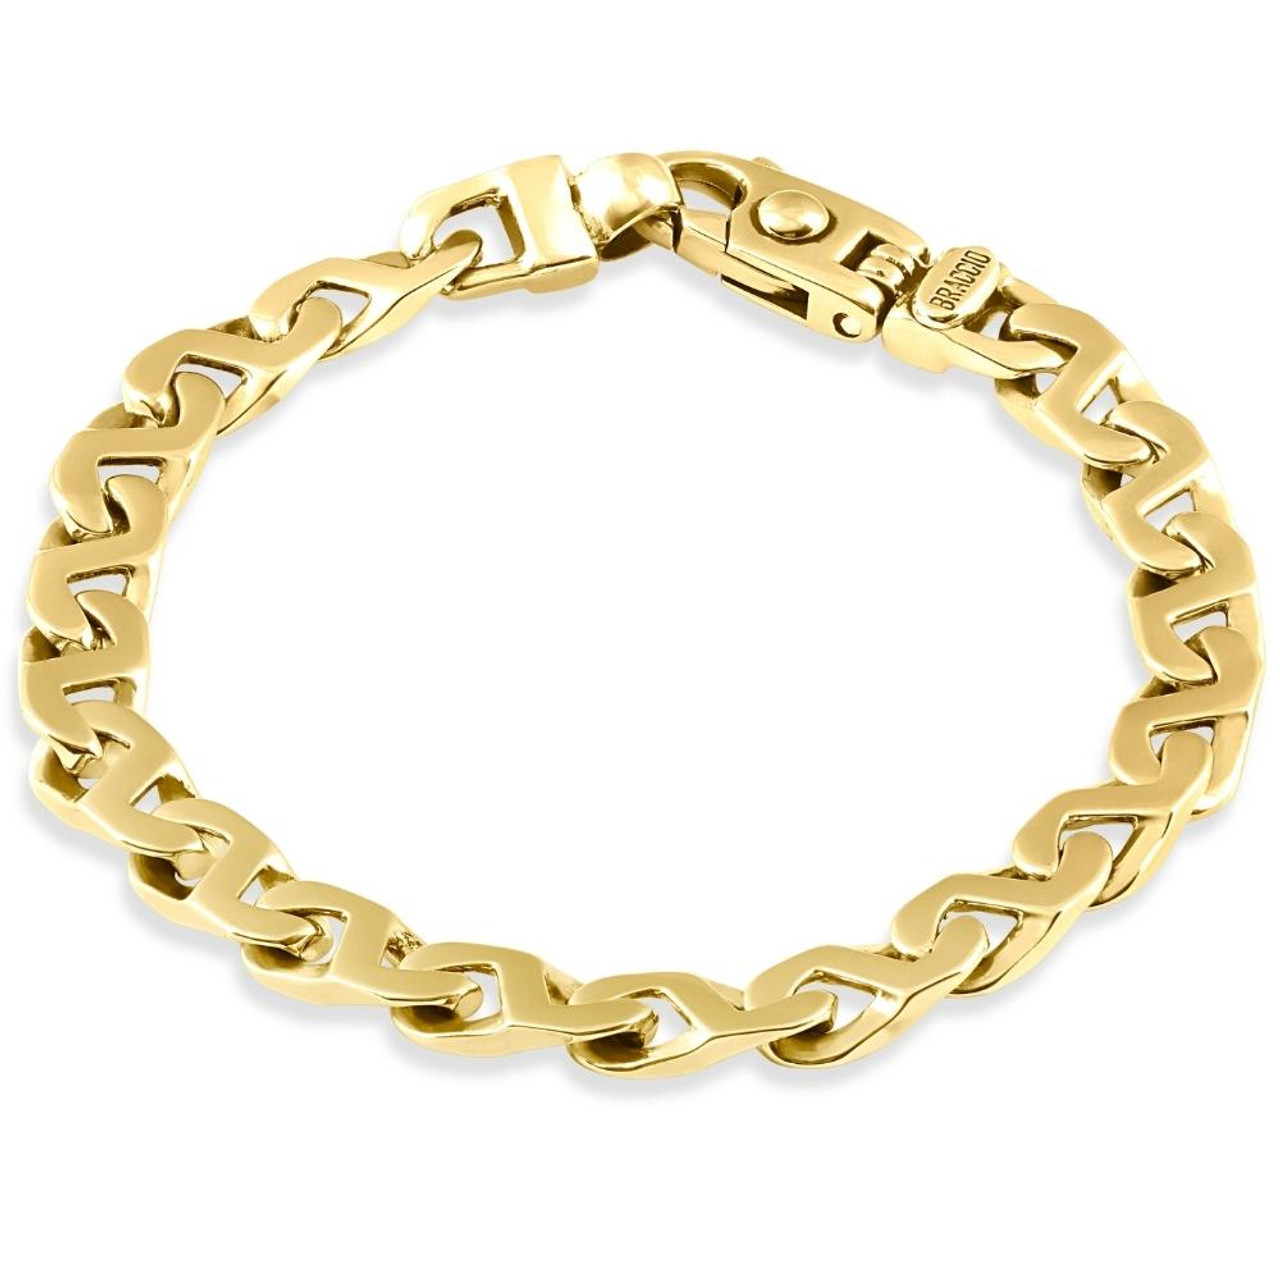 Oval dual finish bracelet with platinum and gold plating -